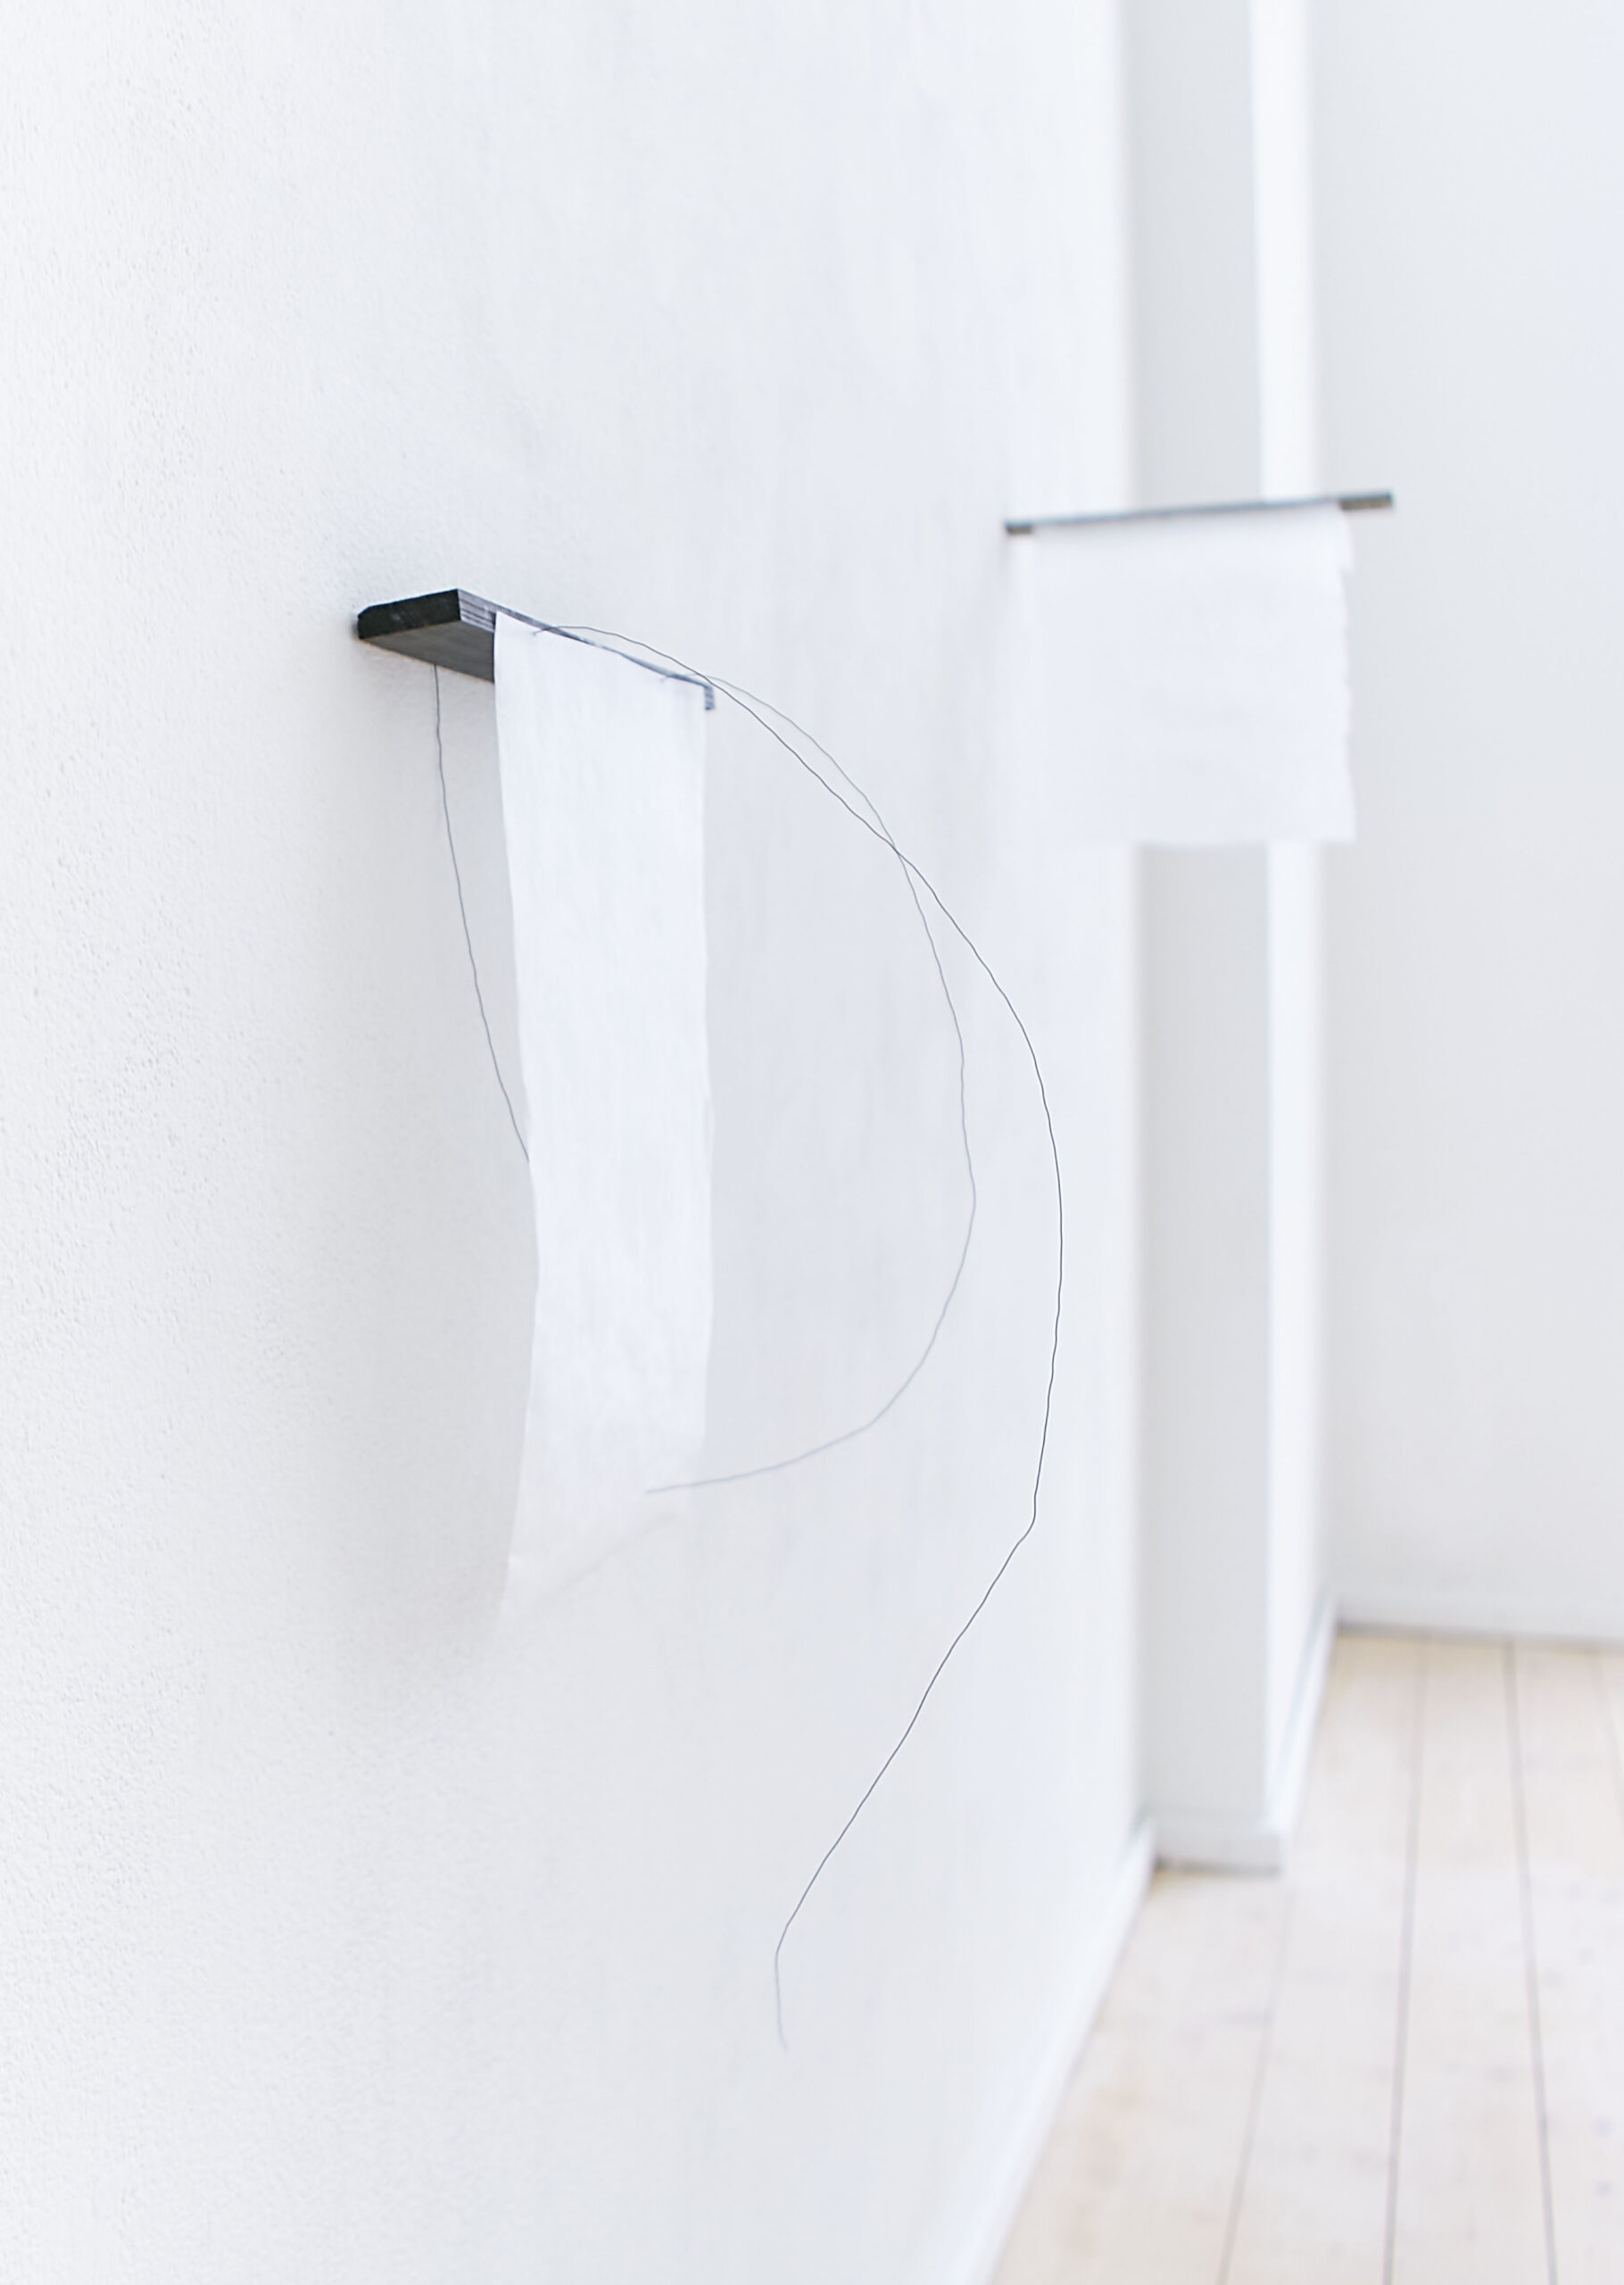 two black pieces of wood on a white wall. Three black thin wire lines grow out of them into a light room which has a wooden light brown floor. Two pieces of transparent handmade papers hang off the wood on the wall